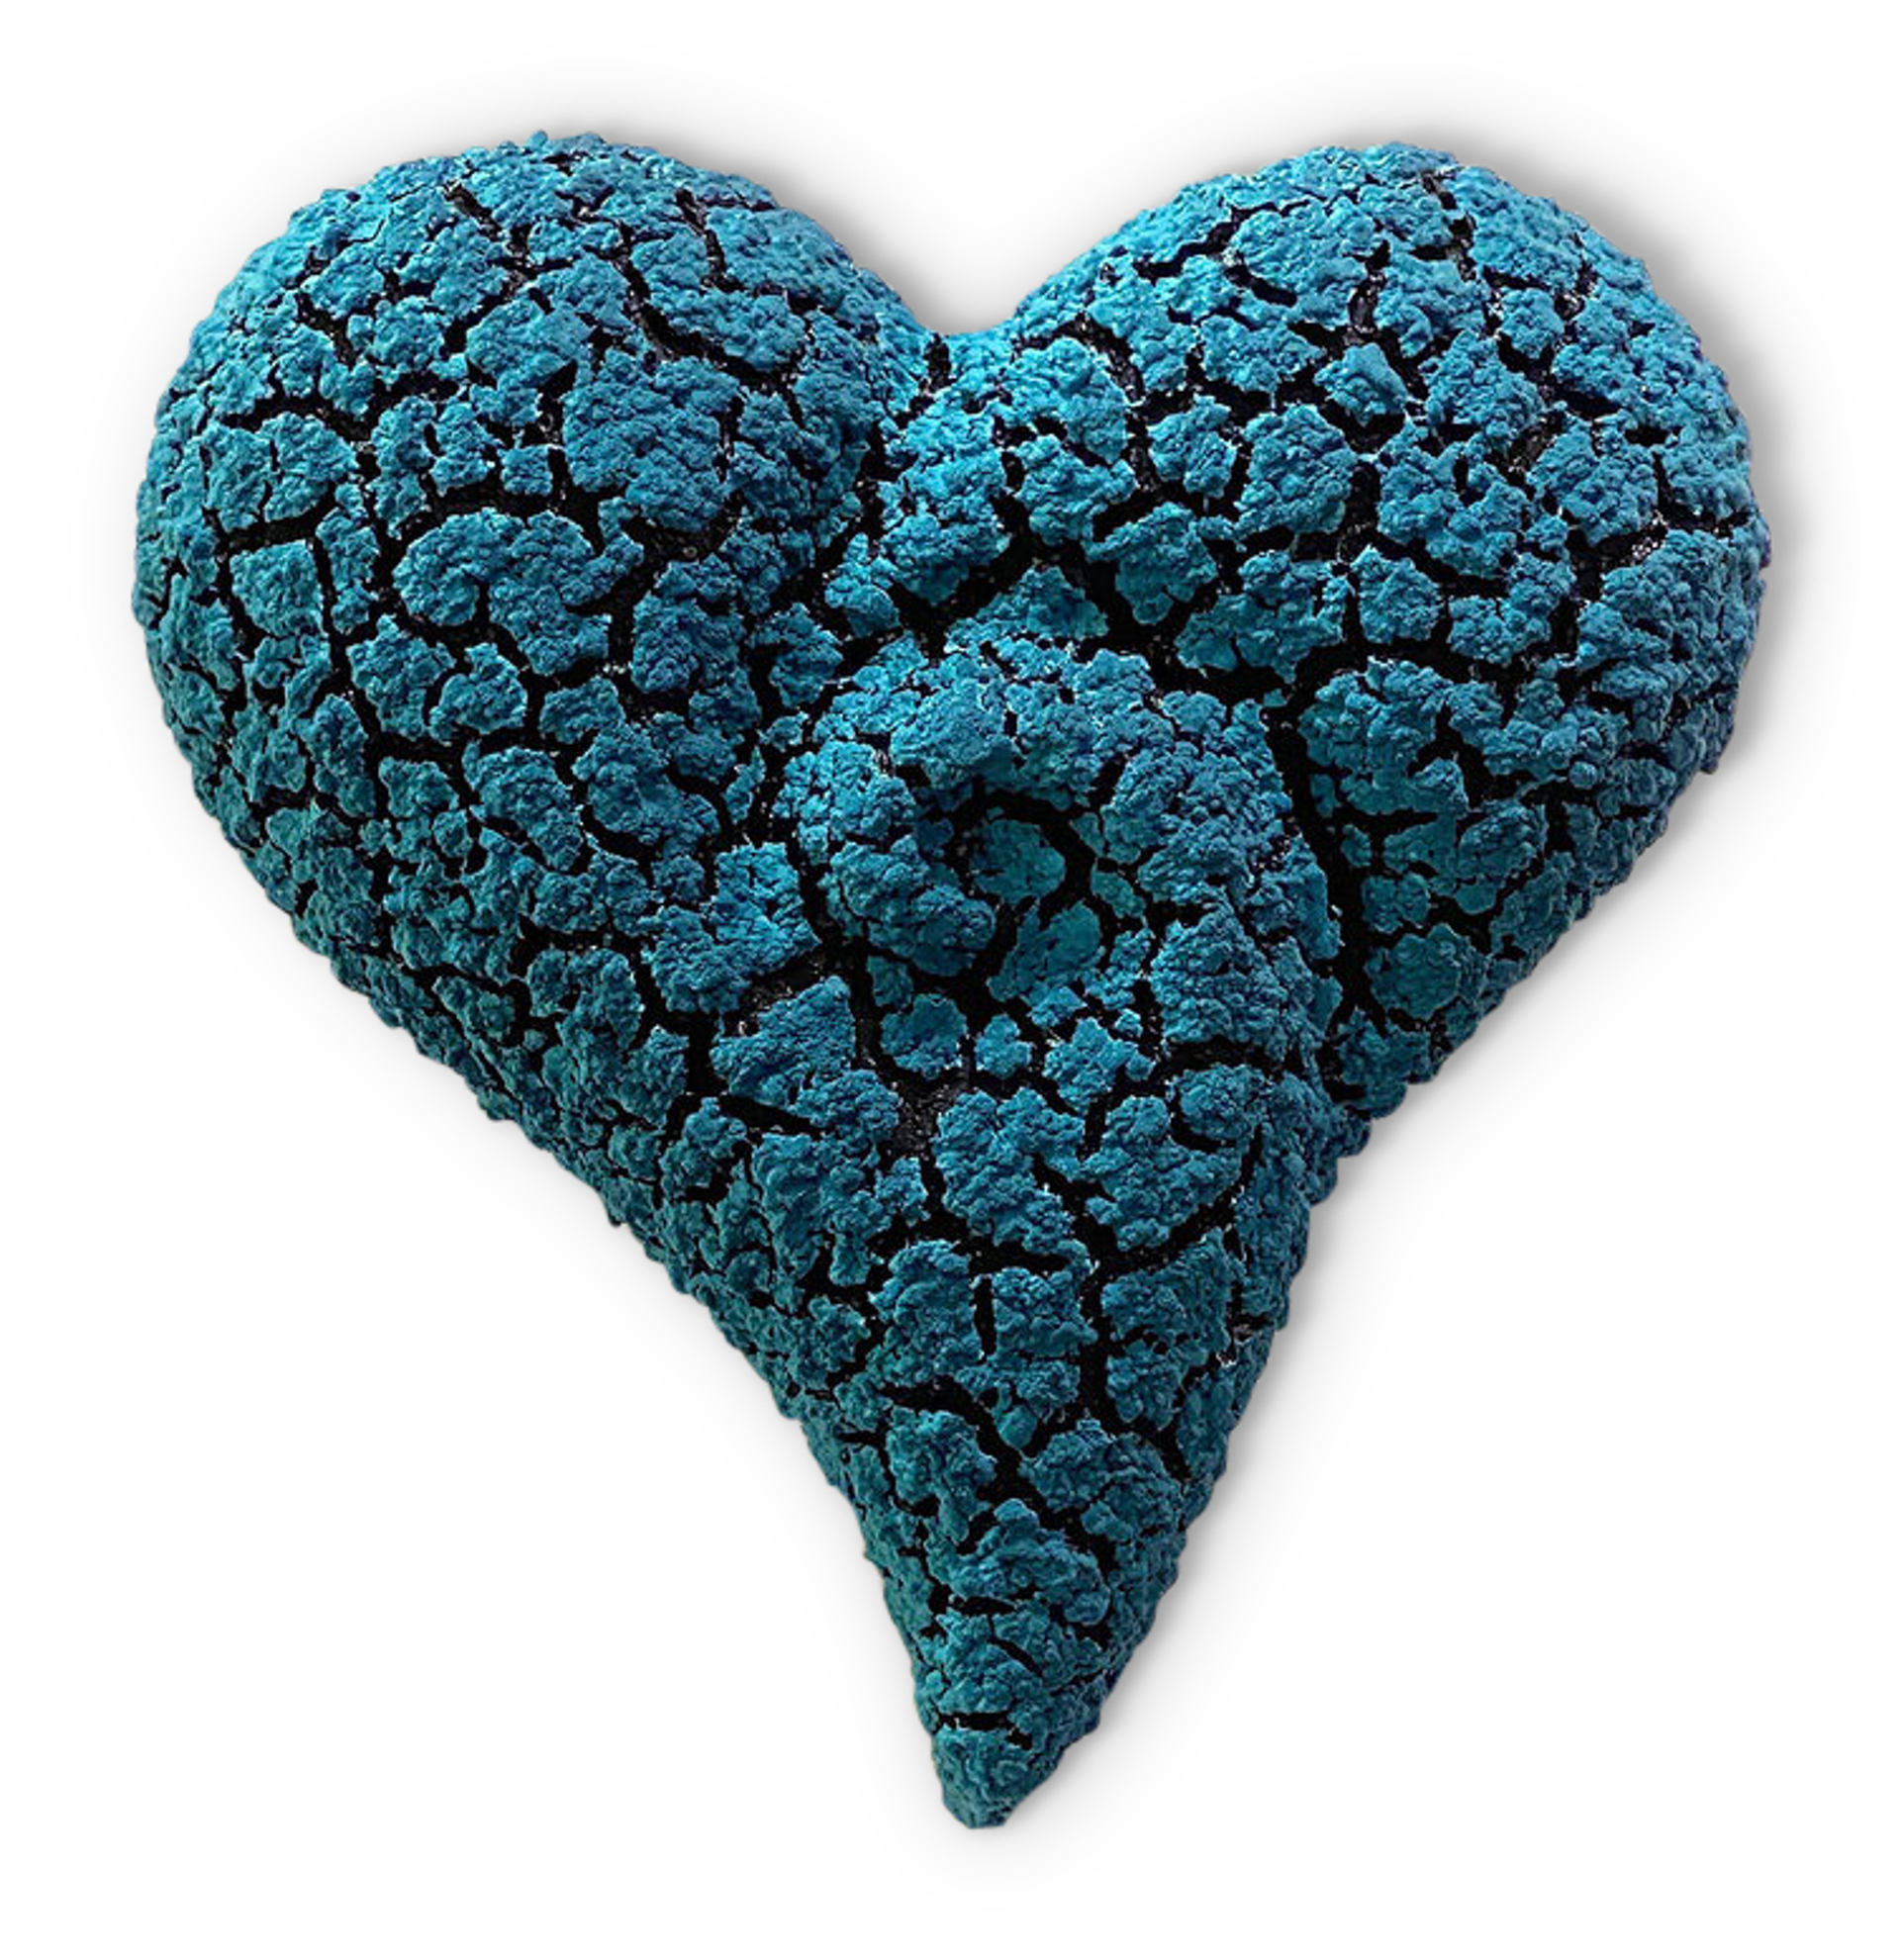 Swirled Lichen Heart ~ Turquoise Green and Peacock Blue by Randy O'Brien